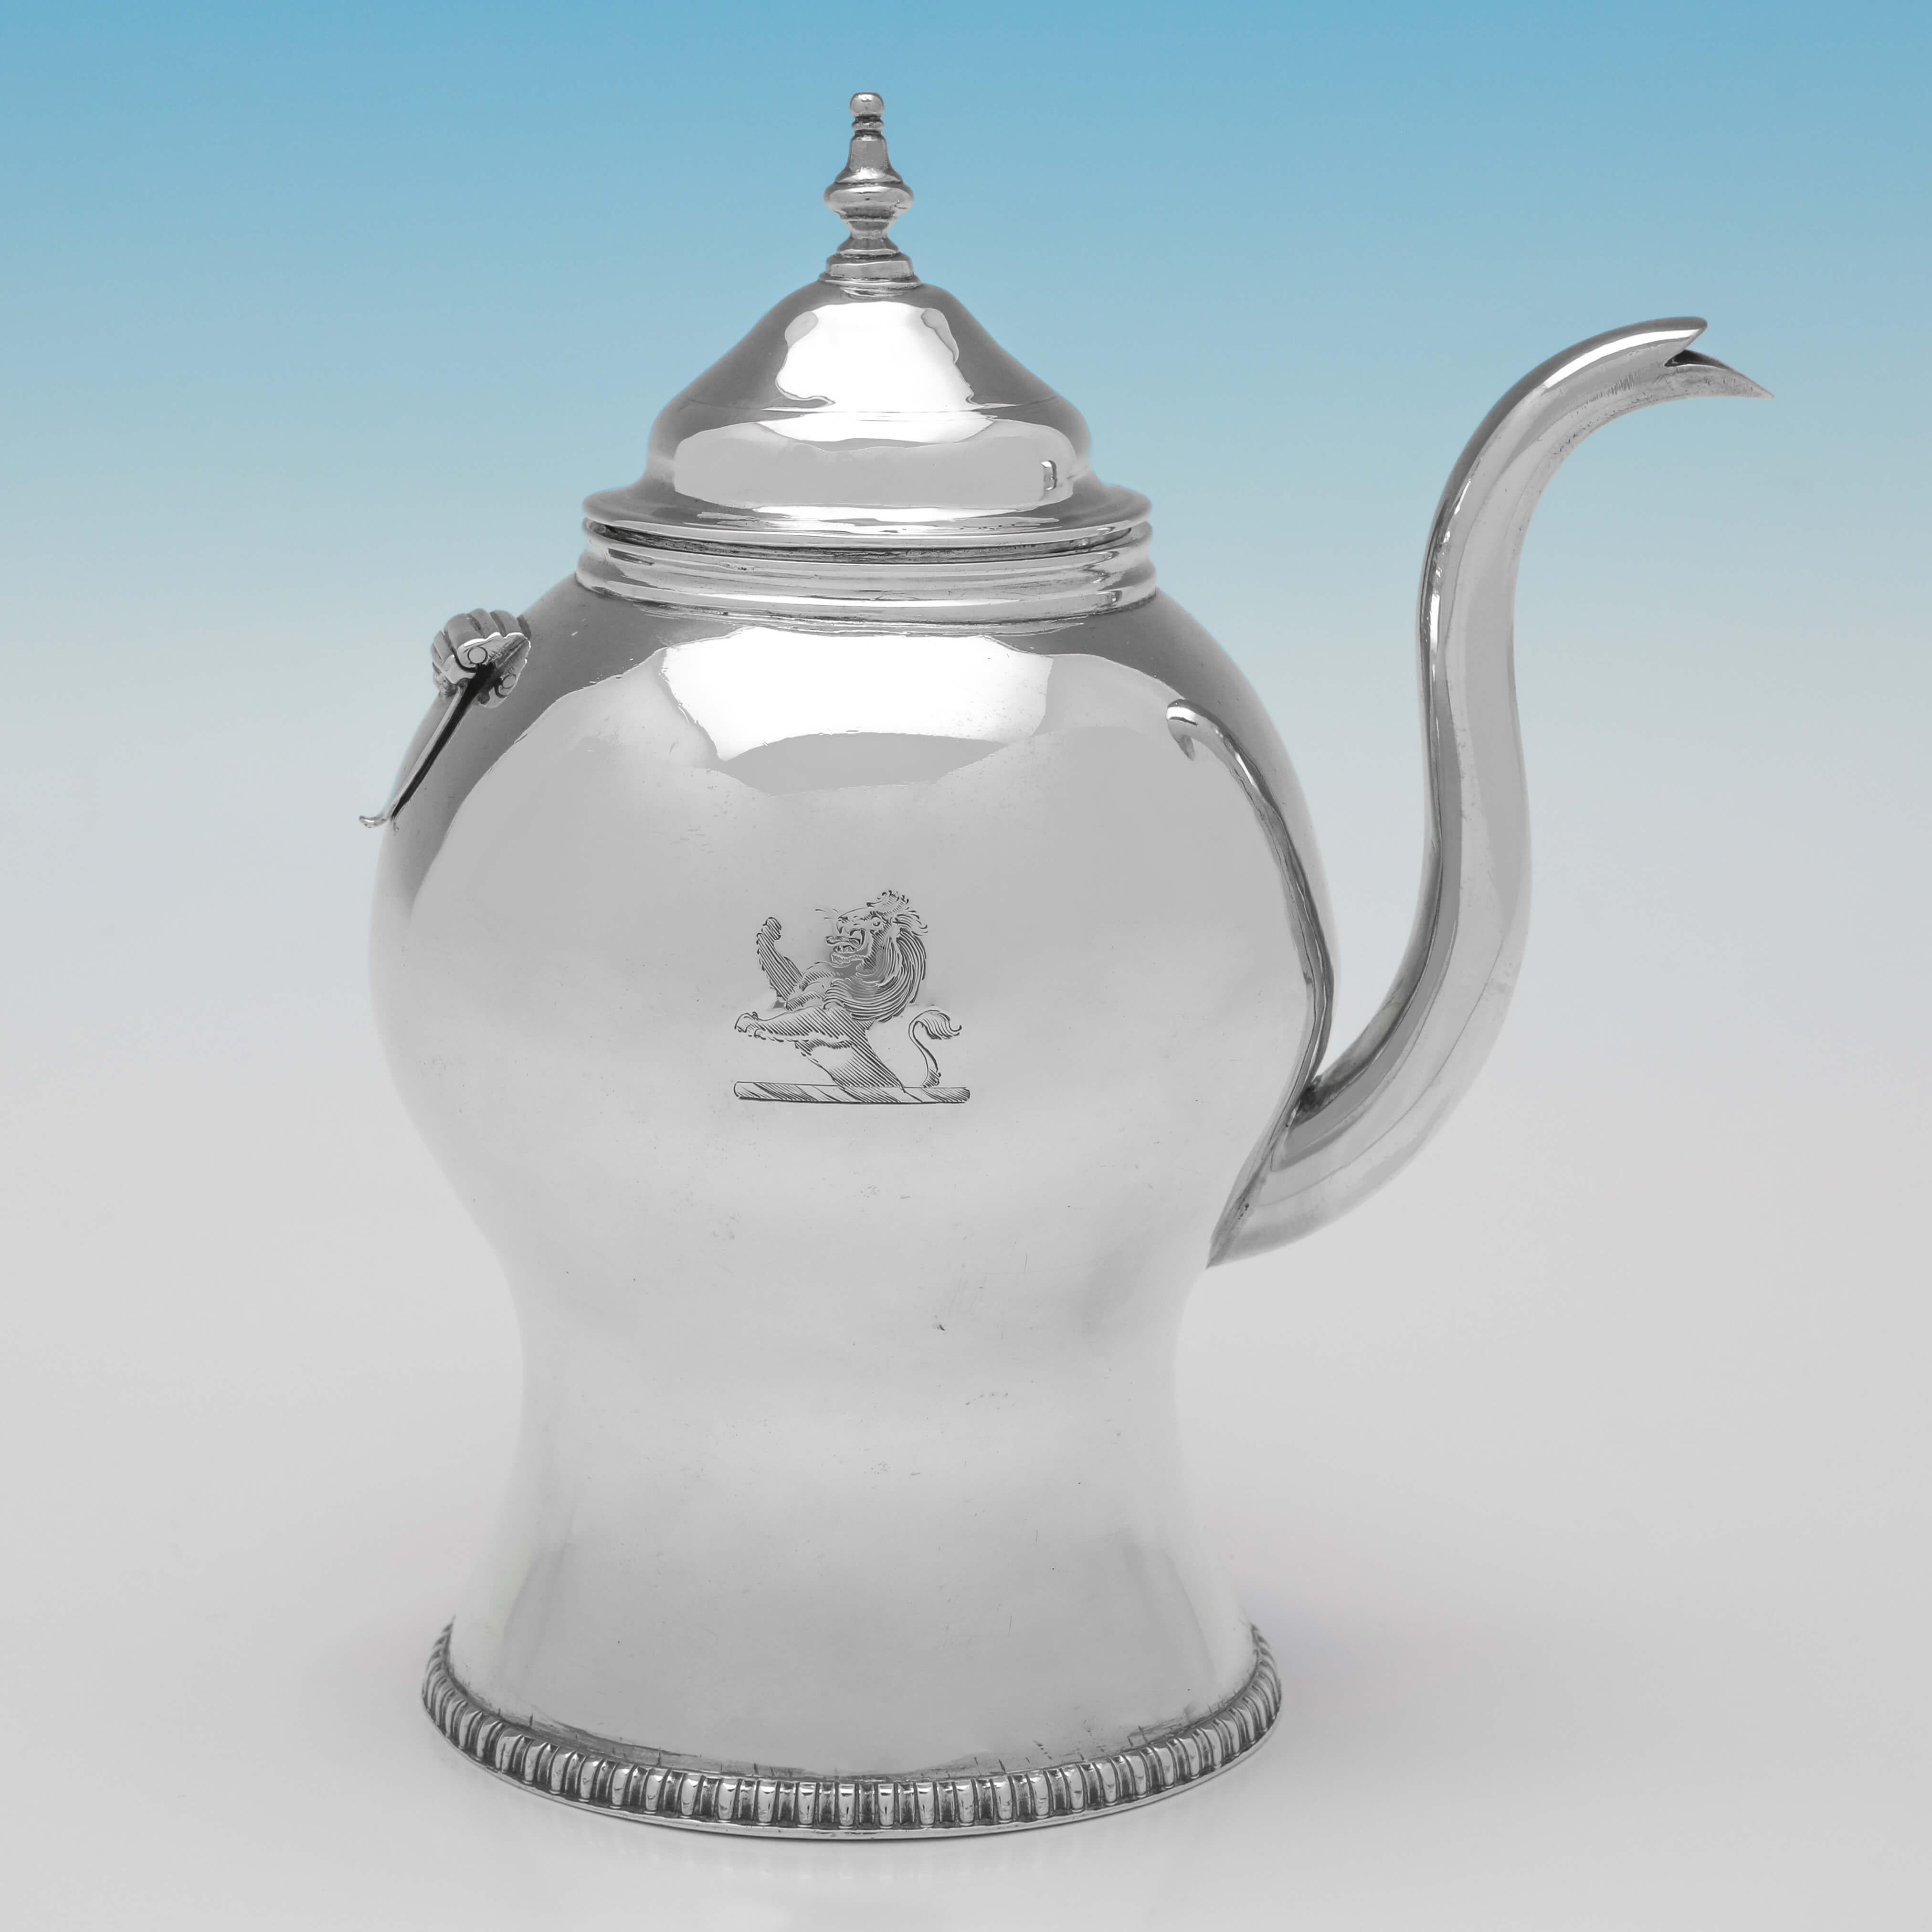 Hallmarked in London in 1813 by Joseph Biggs, this charming George III, antique Sterling Silver Argyll, has a cylindrical body standing on a platform base, with a gadroon border and engraved crest. The handle has a wicker cover and the hot water